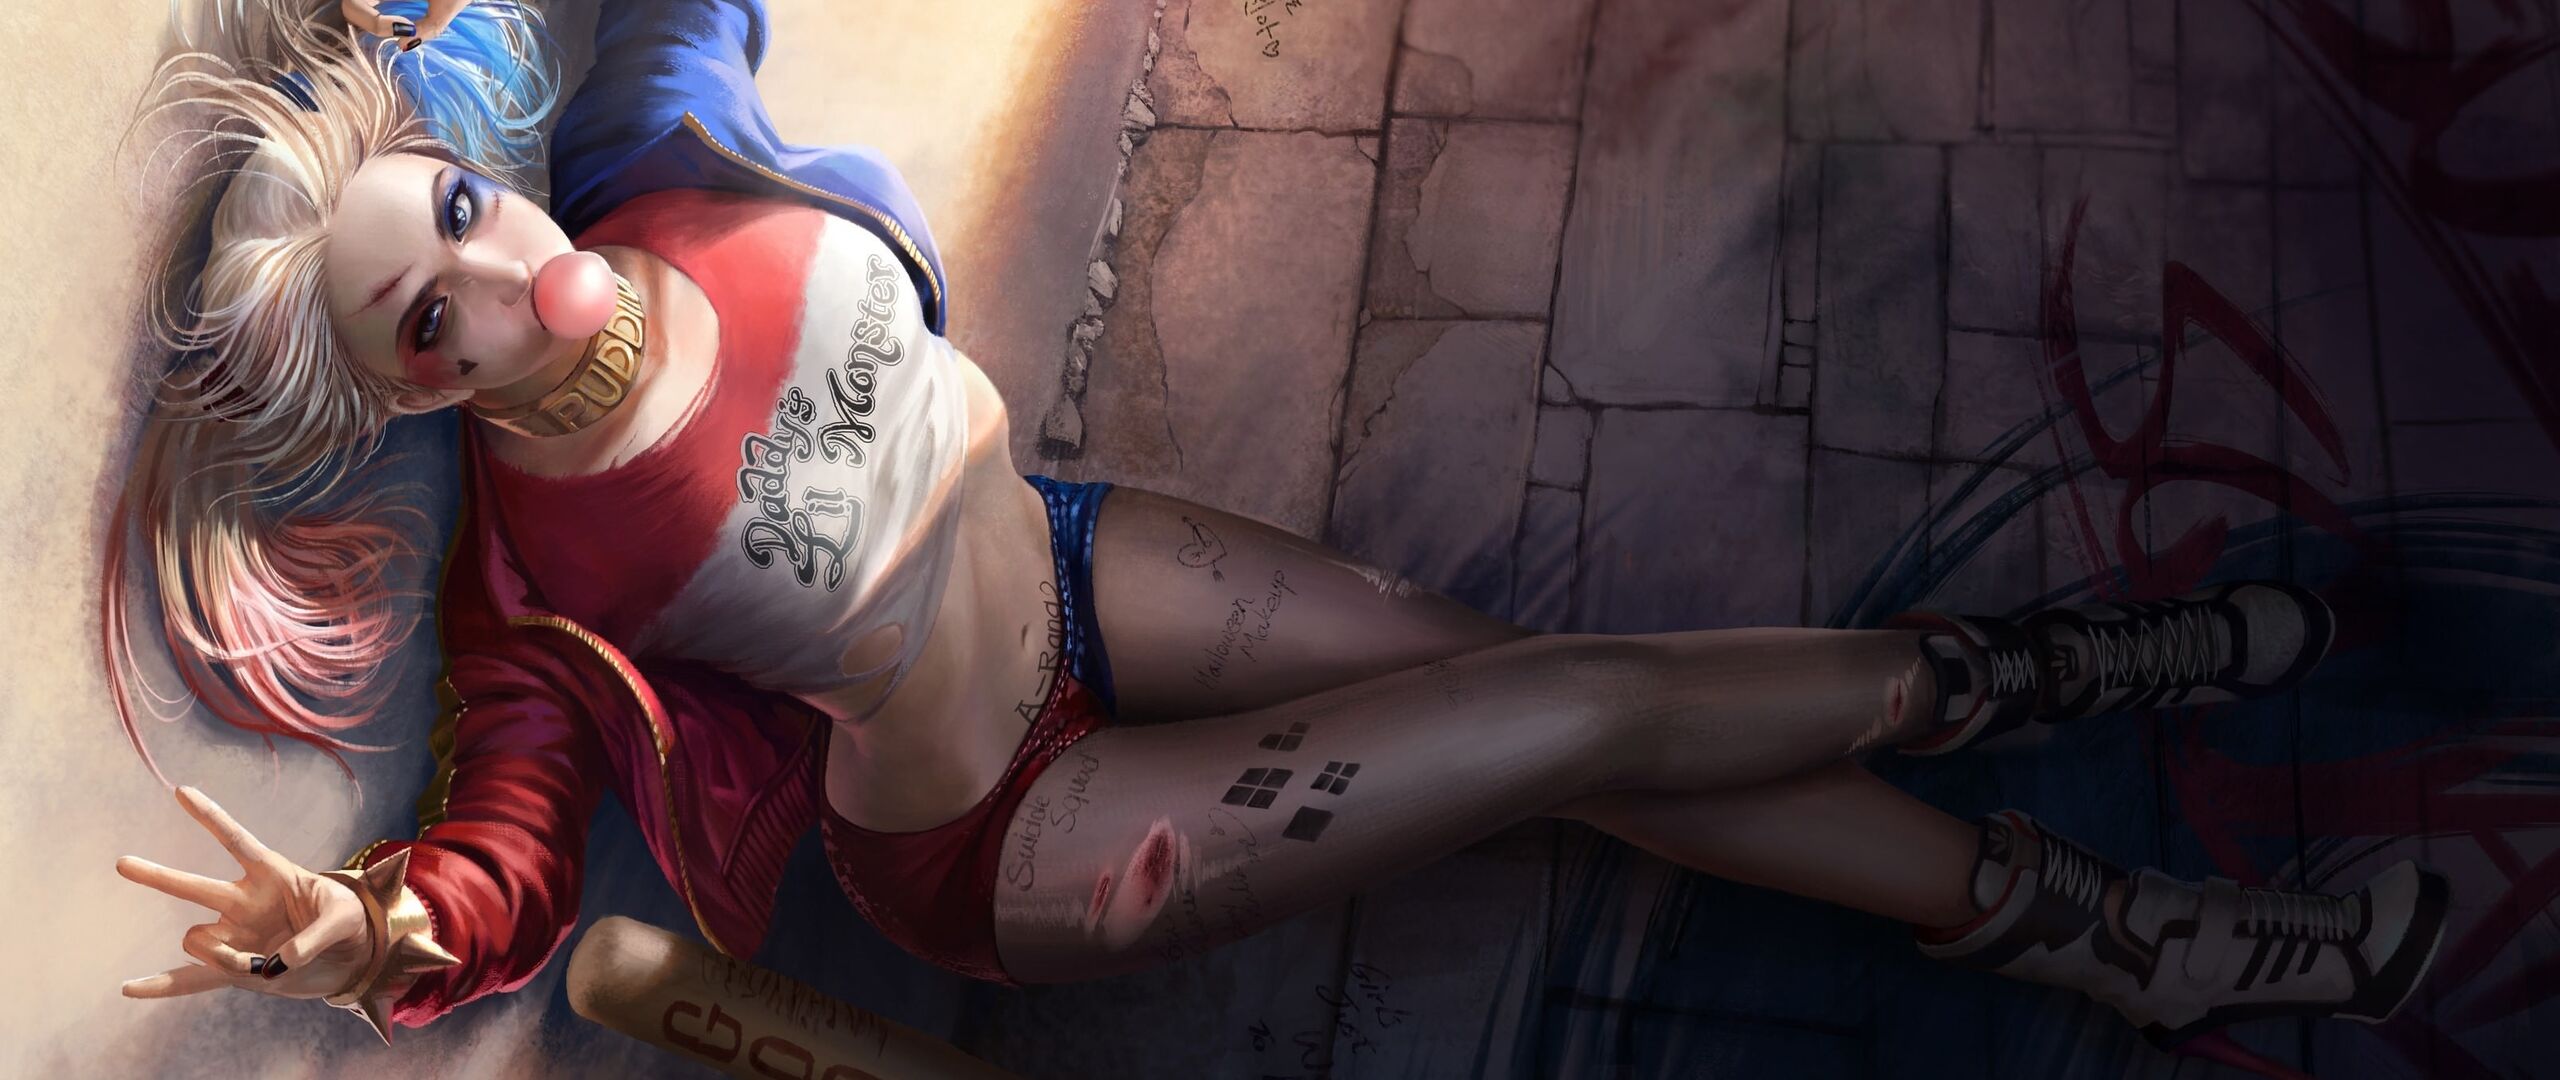 movies-wallpapers. harley-quinn-wallpapers. 